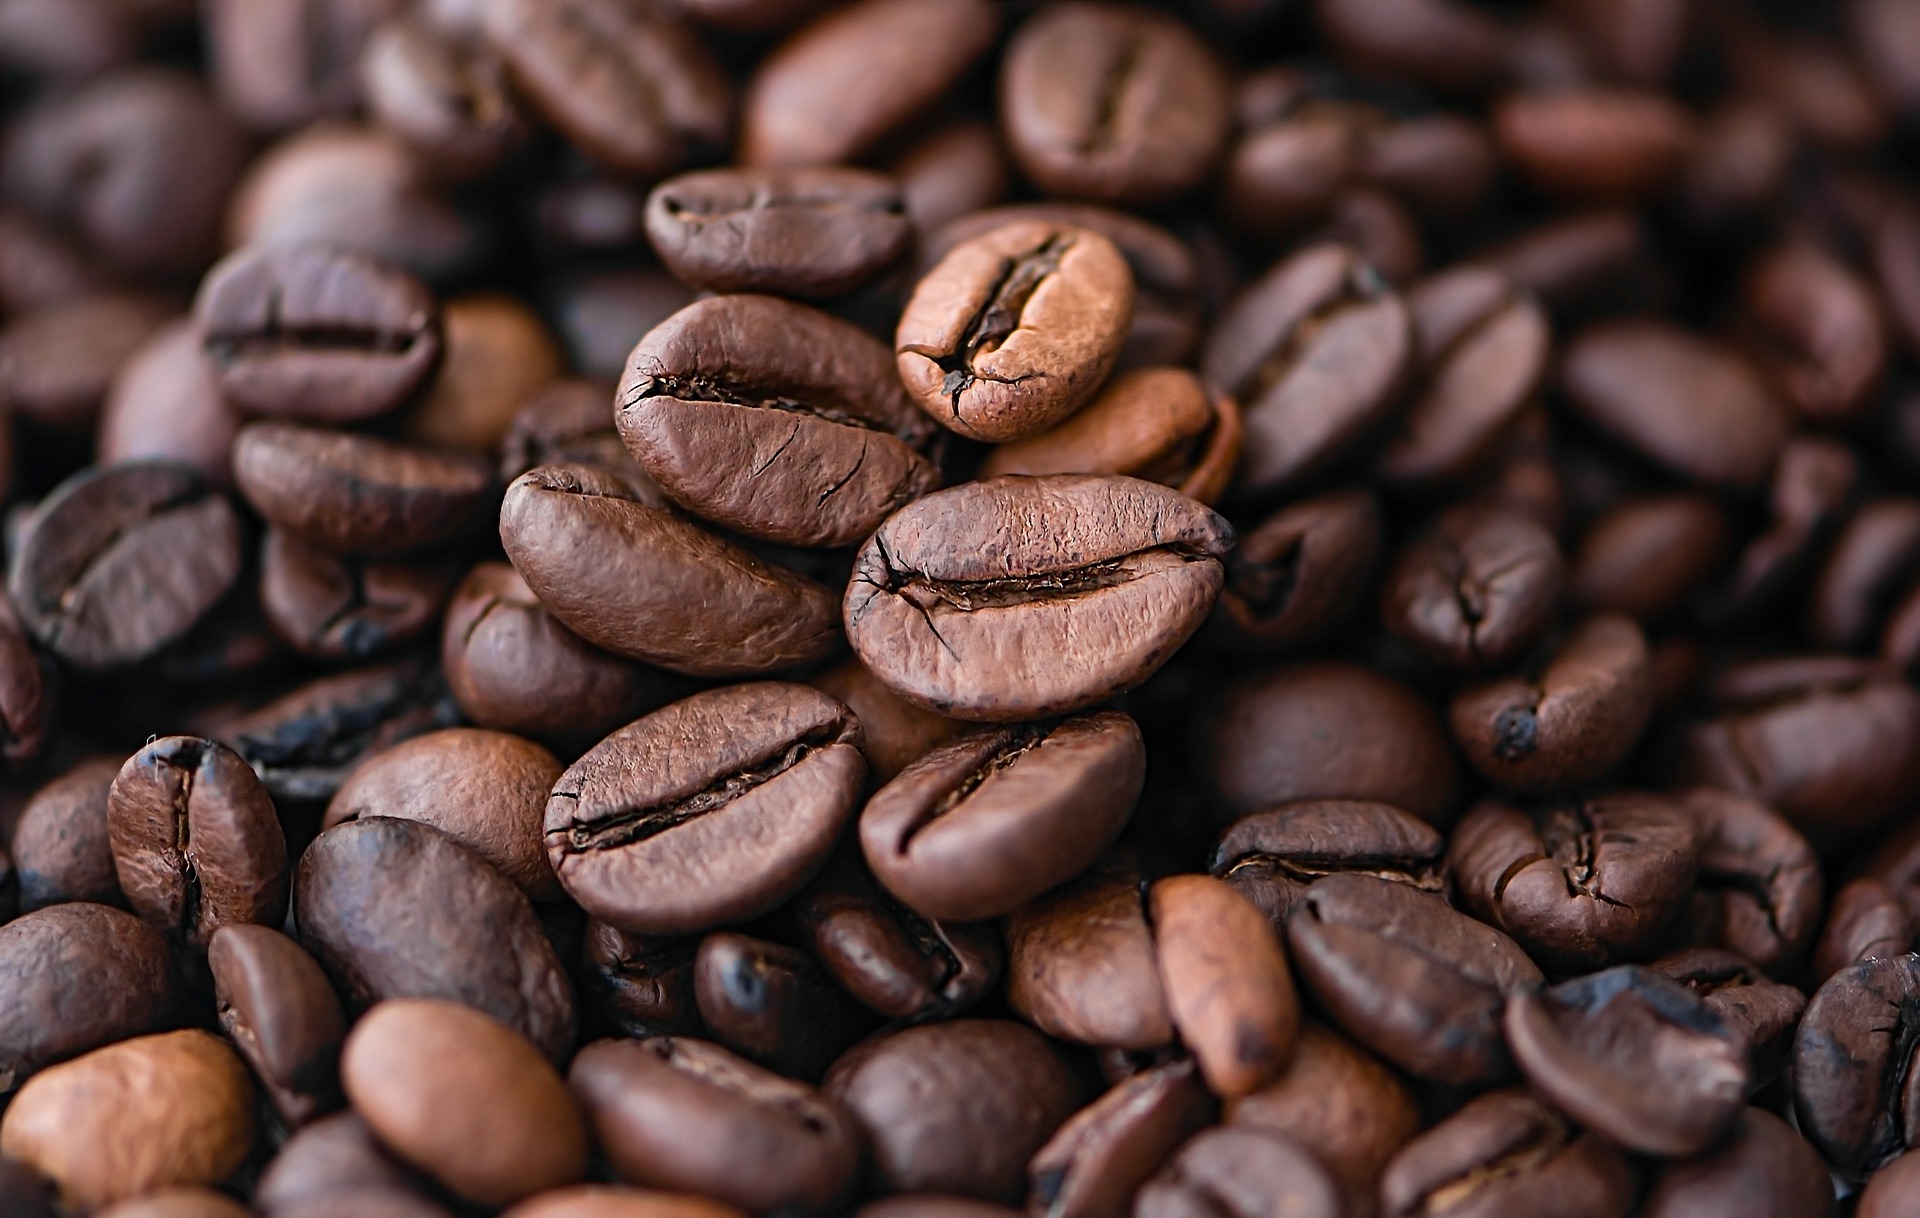 A close up shot of a pile of coffee beans.